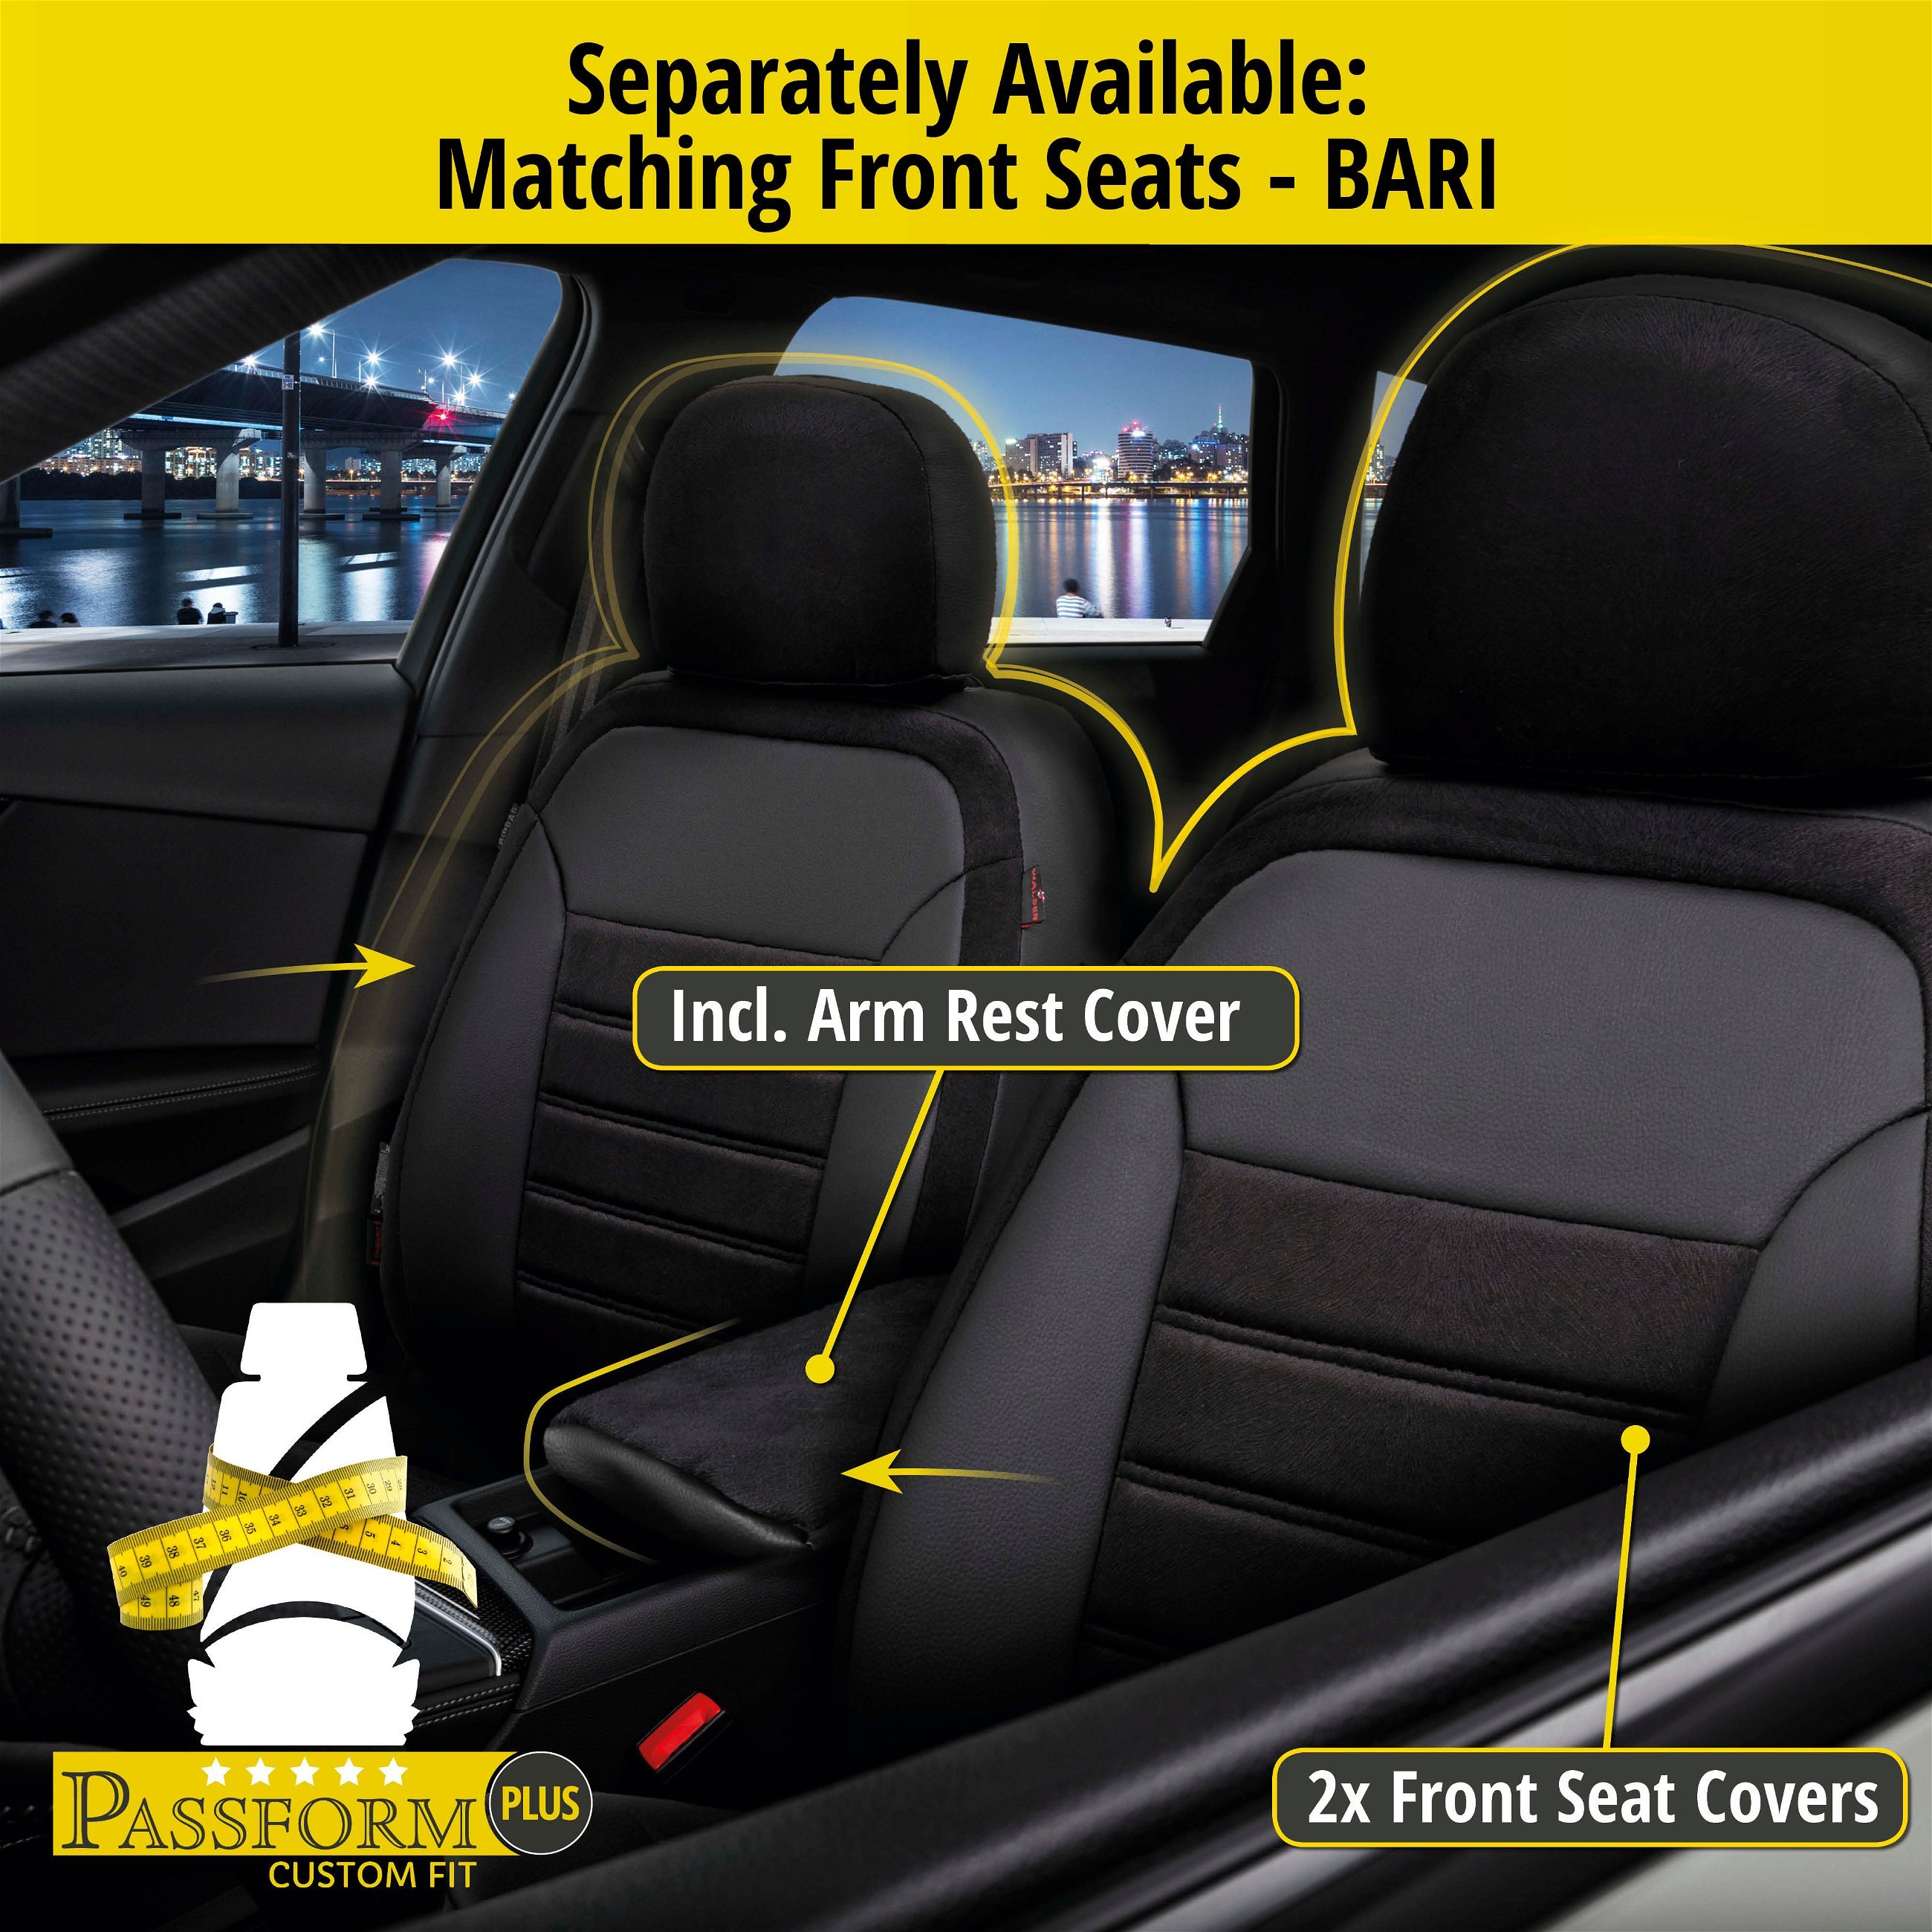 Seat Cover Bari for Fiat Grande Punto (199) 06/2005-Today, 1 rear seat cover for normal seats